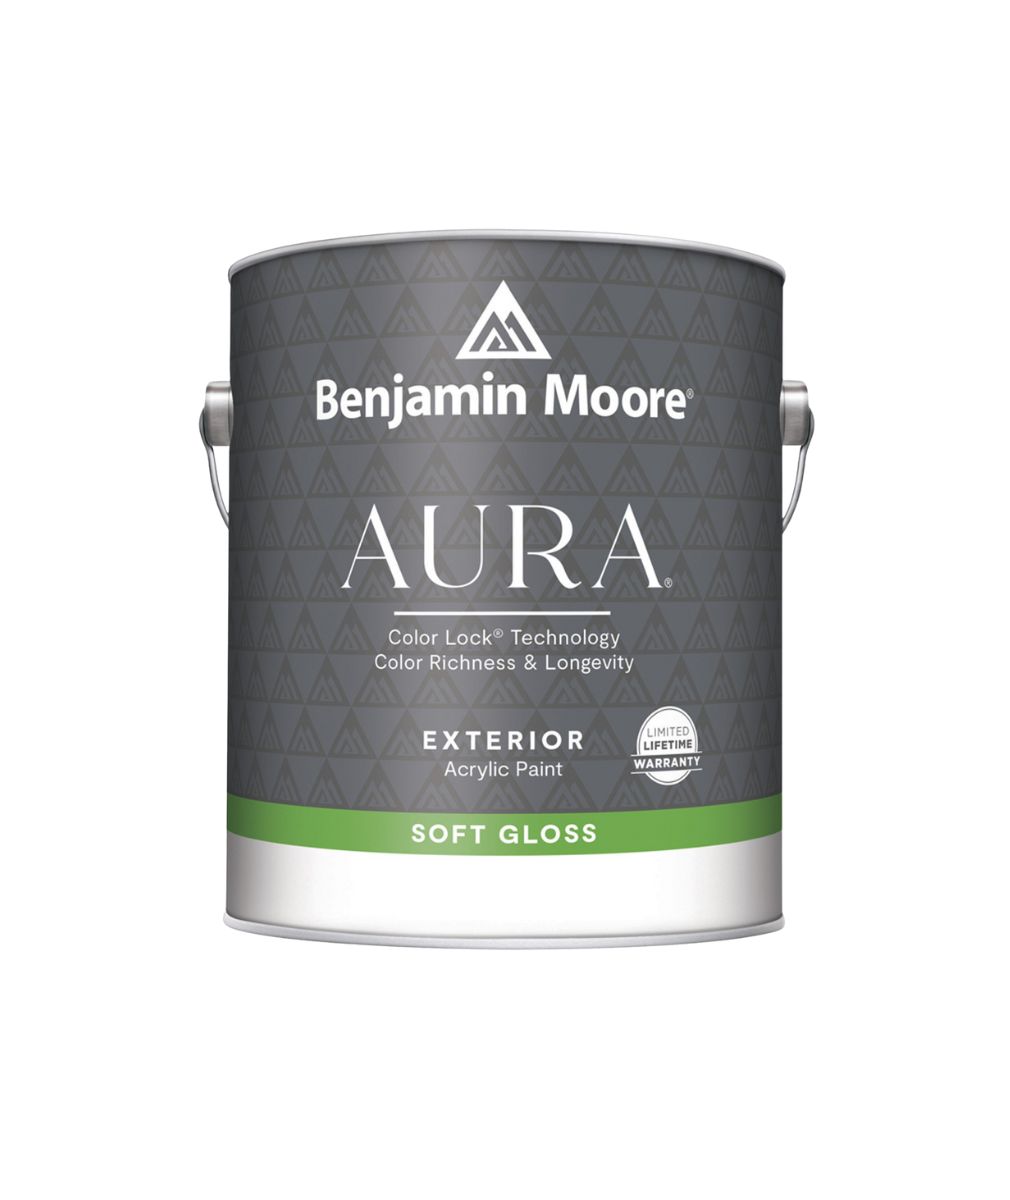 Benjamin Moore Aura Exterior Soft Gloss Paint available at JC Licht.